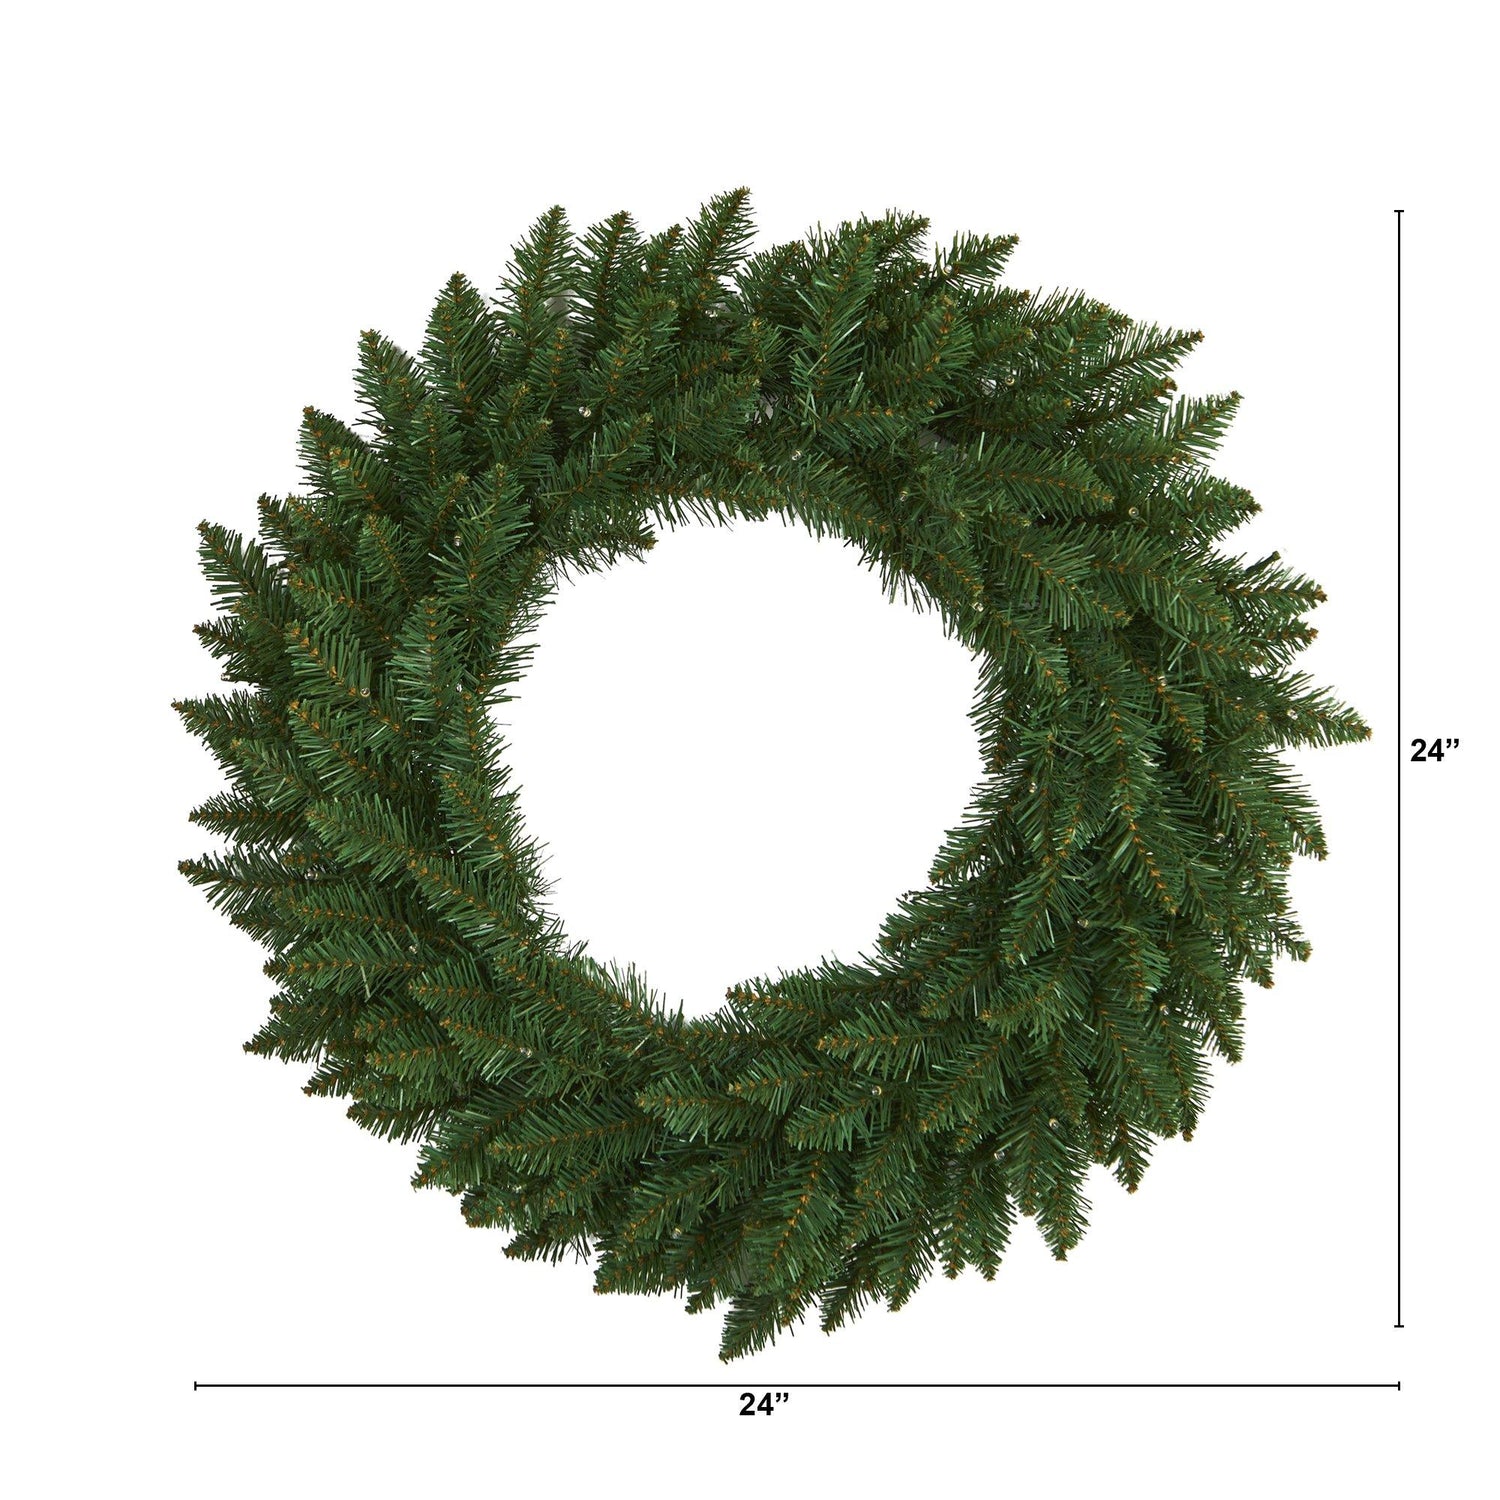 24” Green Pine Artificial Christmas Wreath with 35 Clear LED Lights